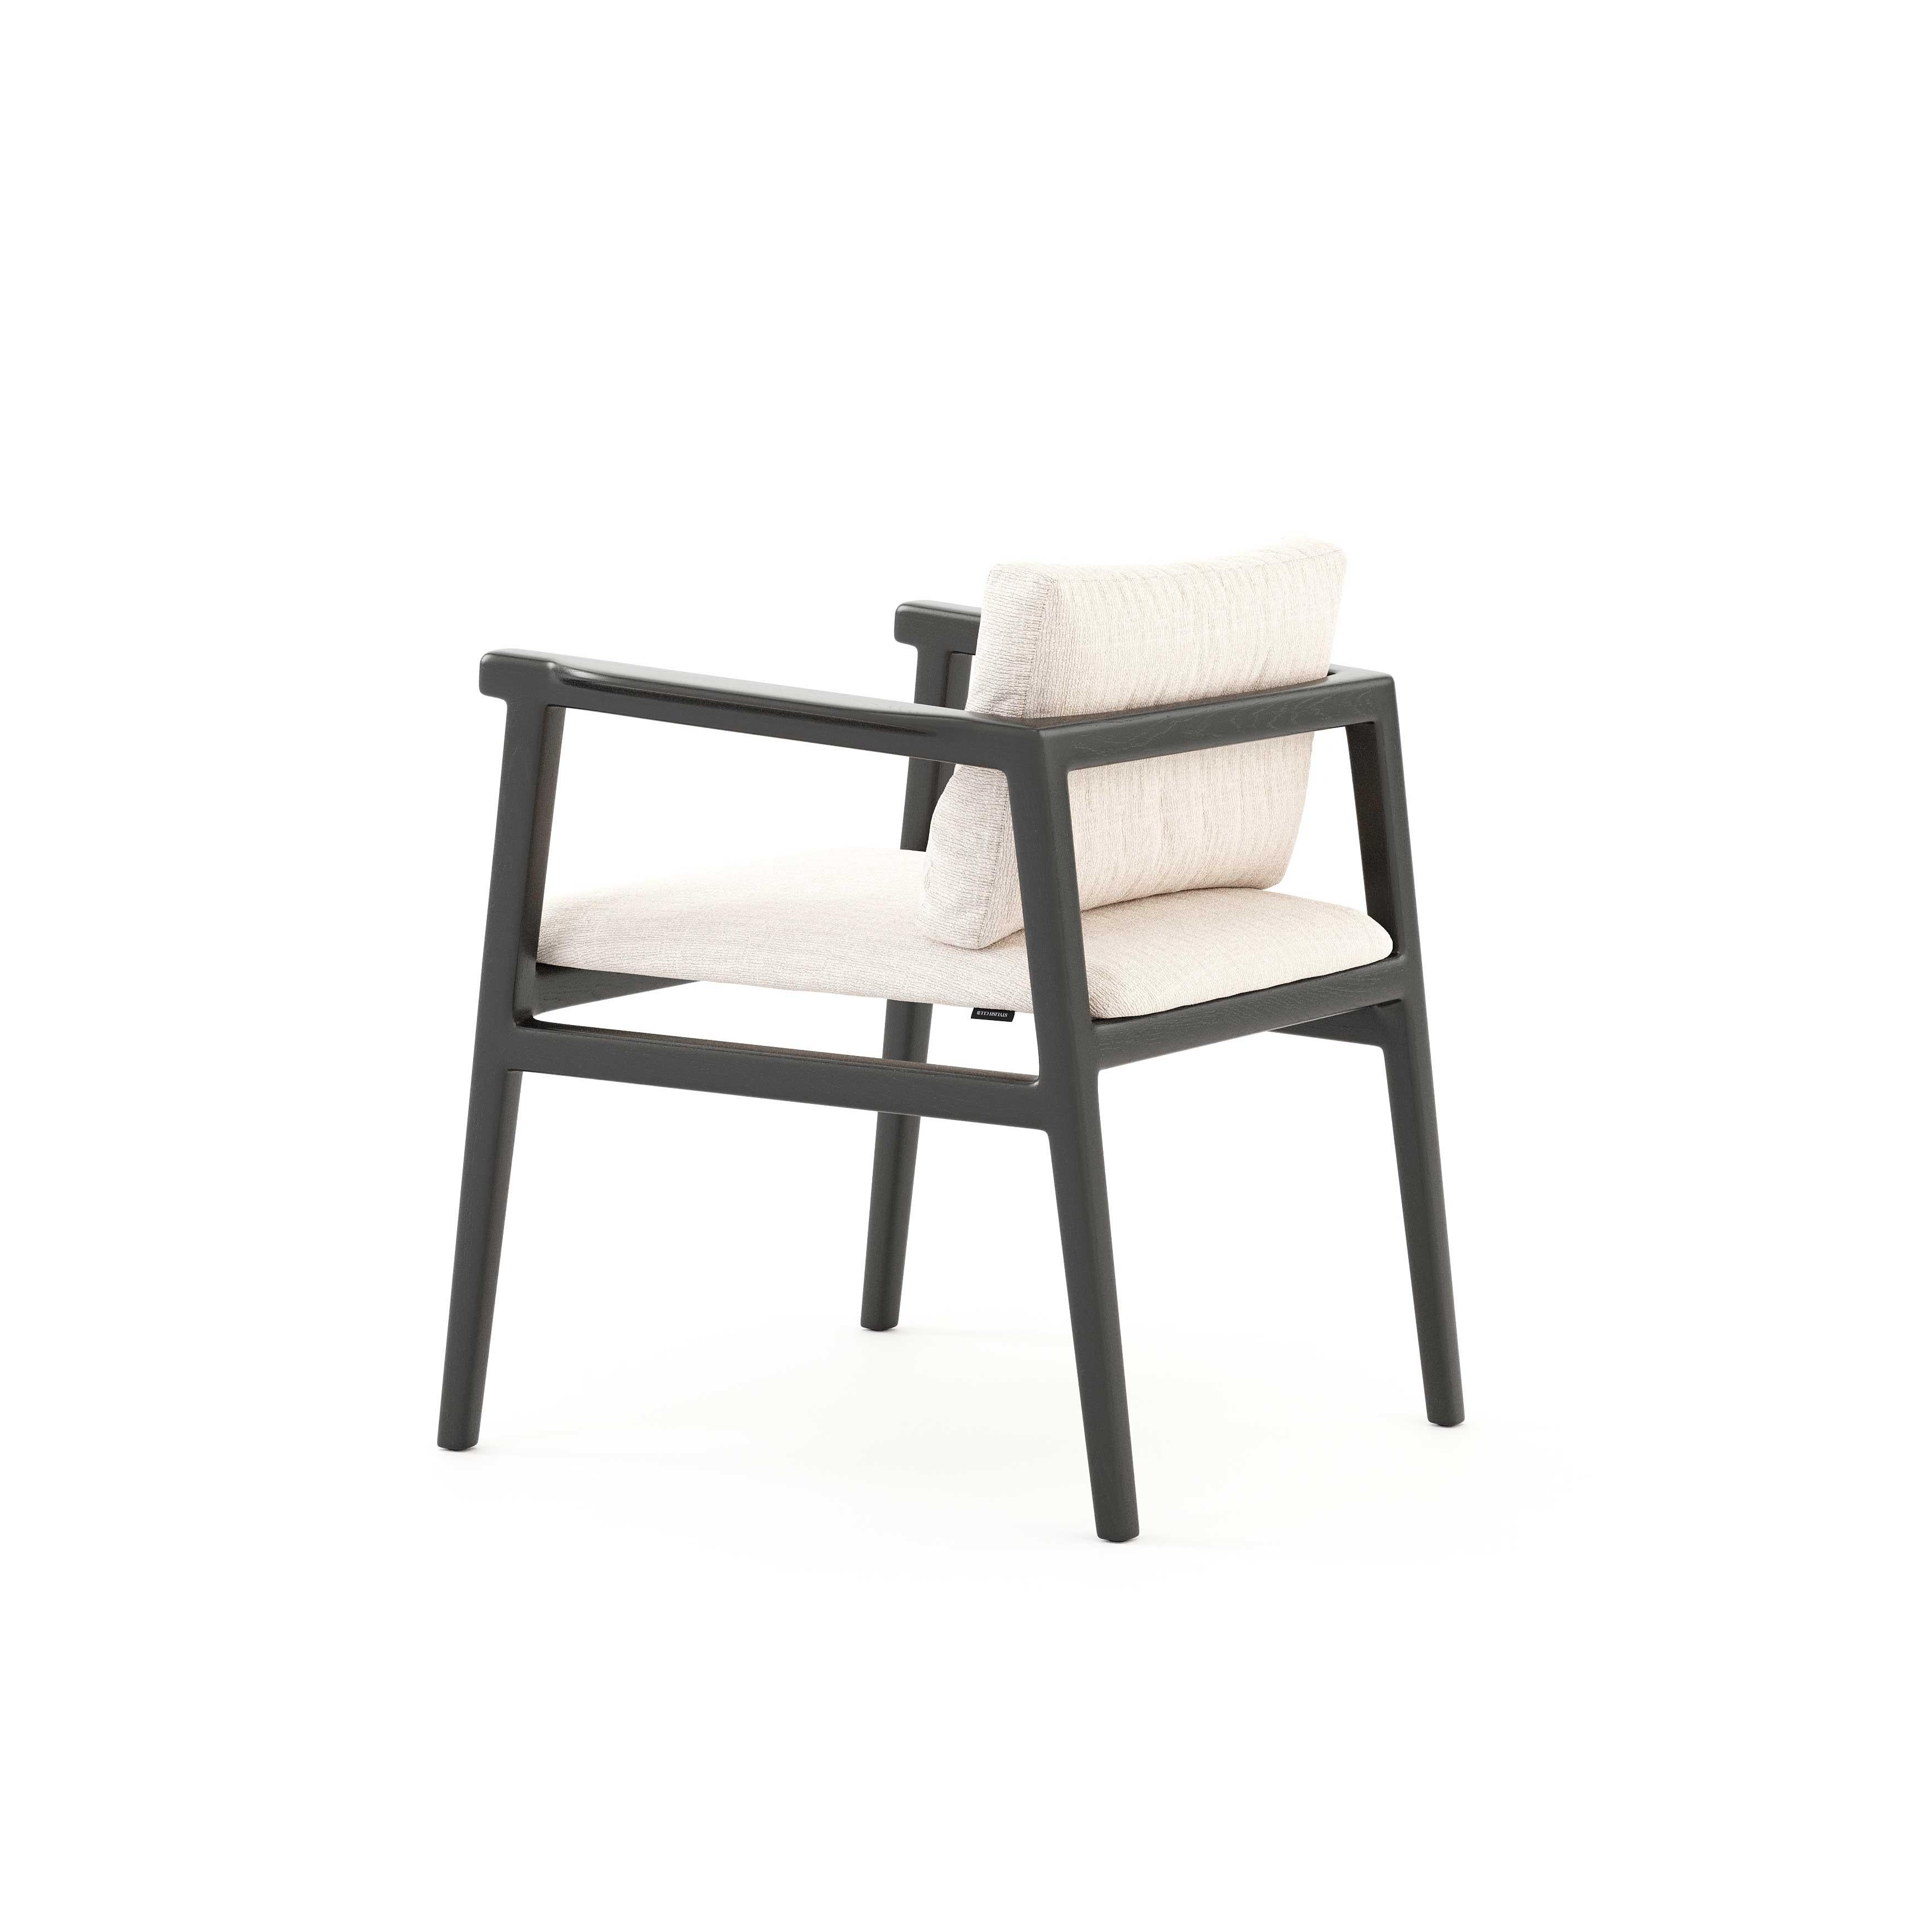 Contemporary Modern Toro Dining Chair made with wood and textile, Handmade by Stylish Club For Sale